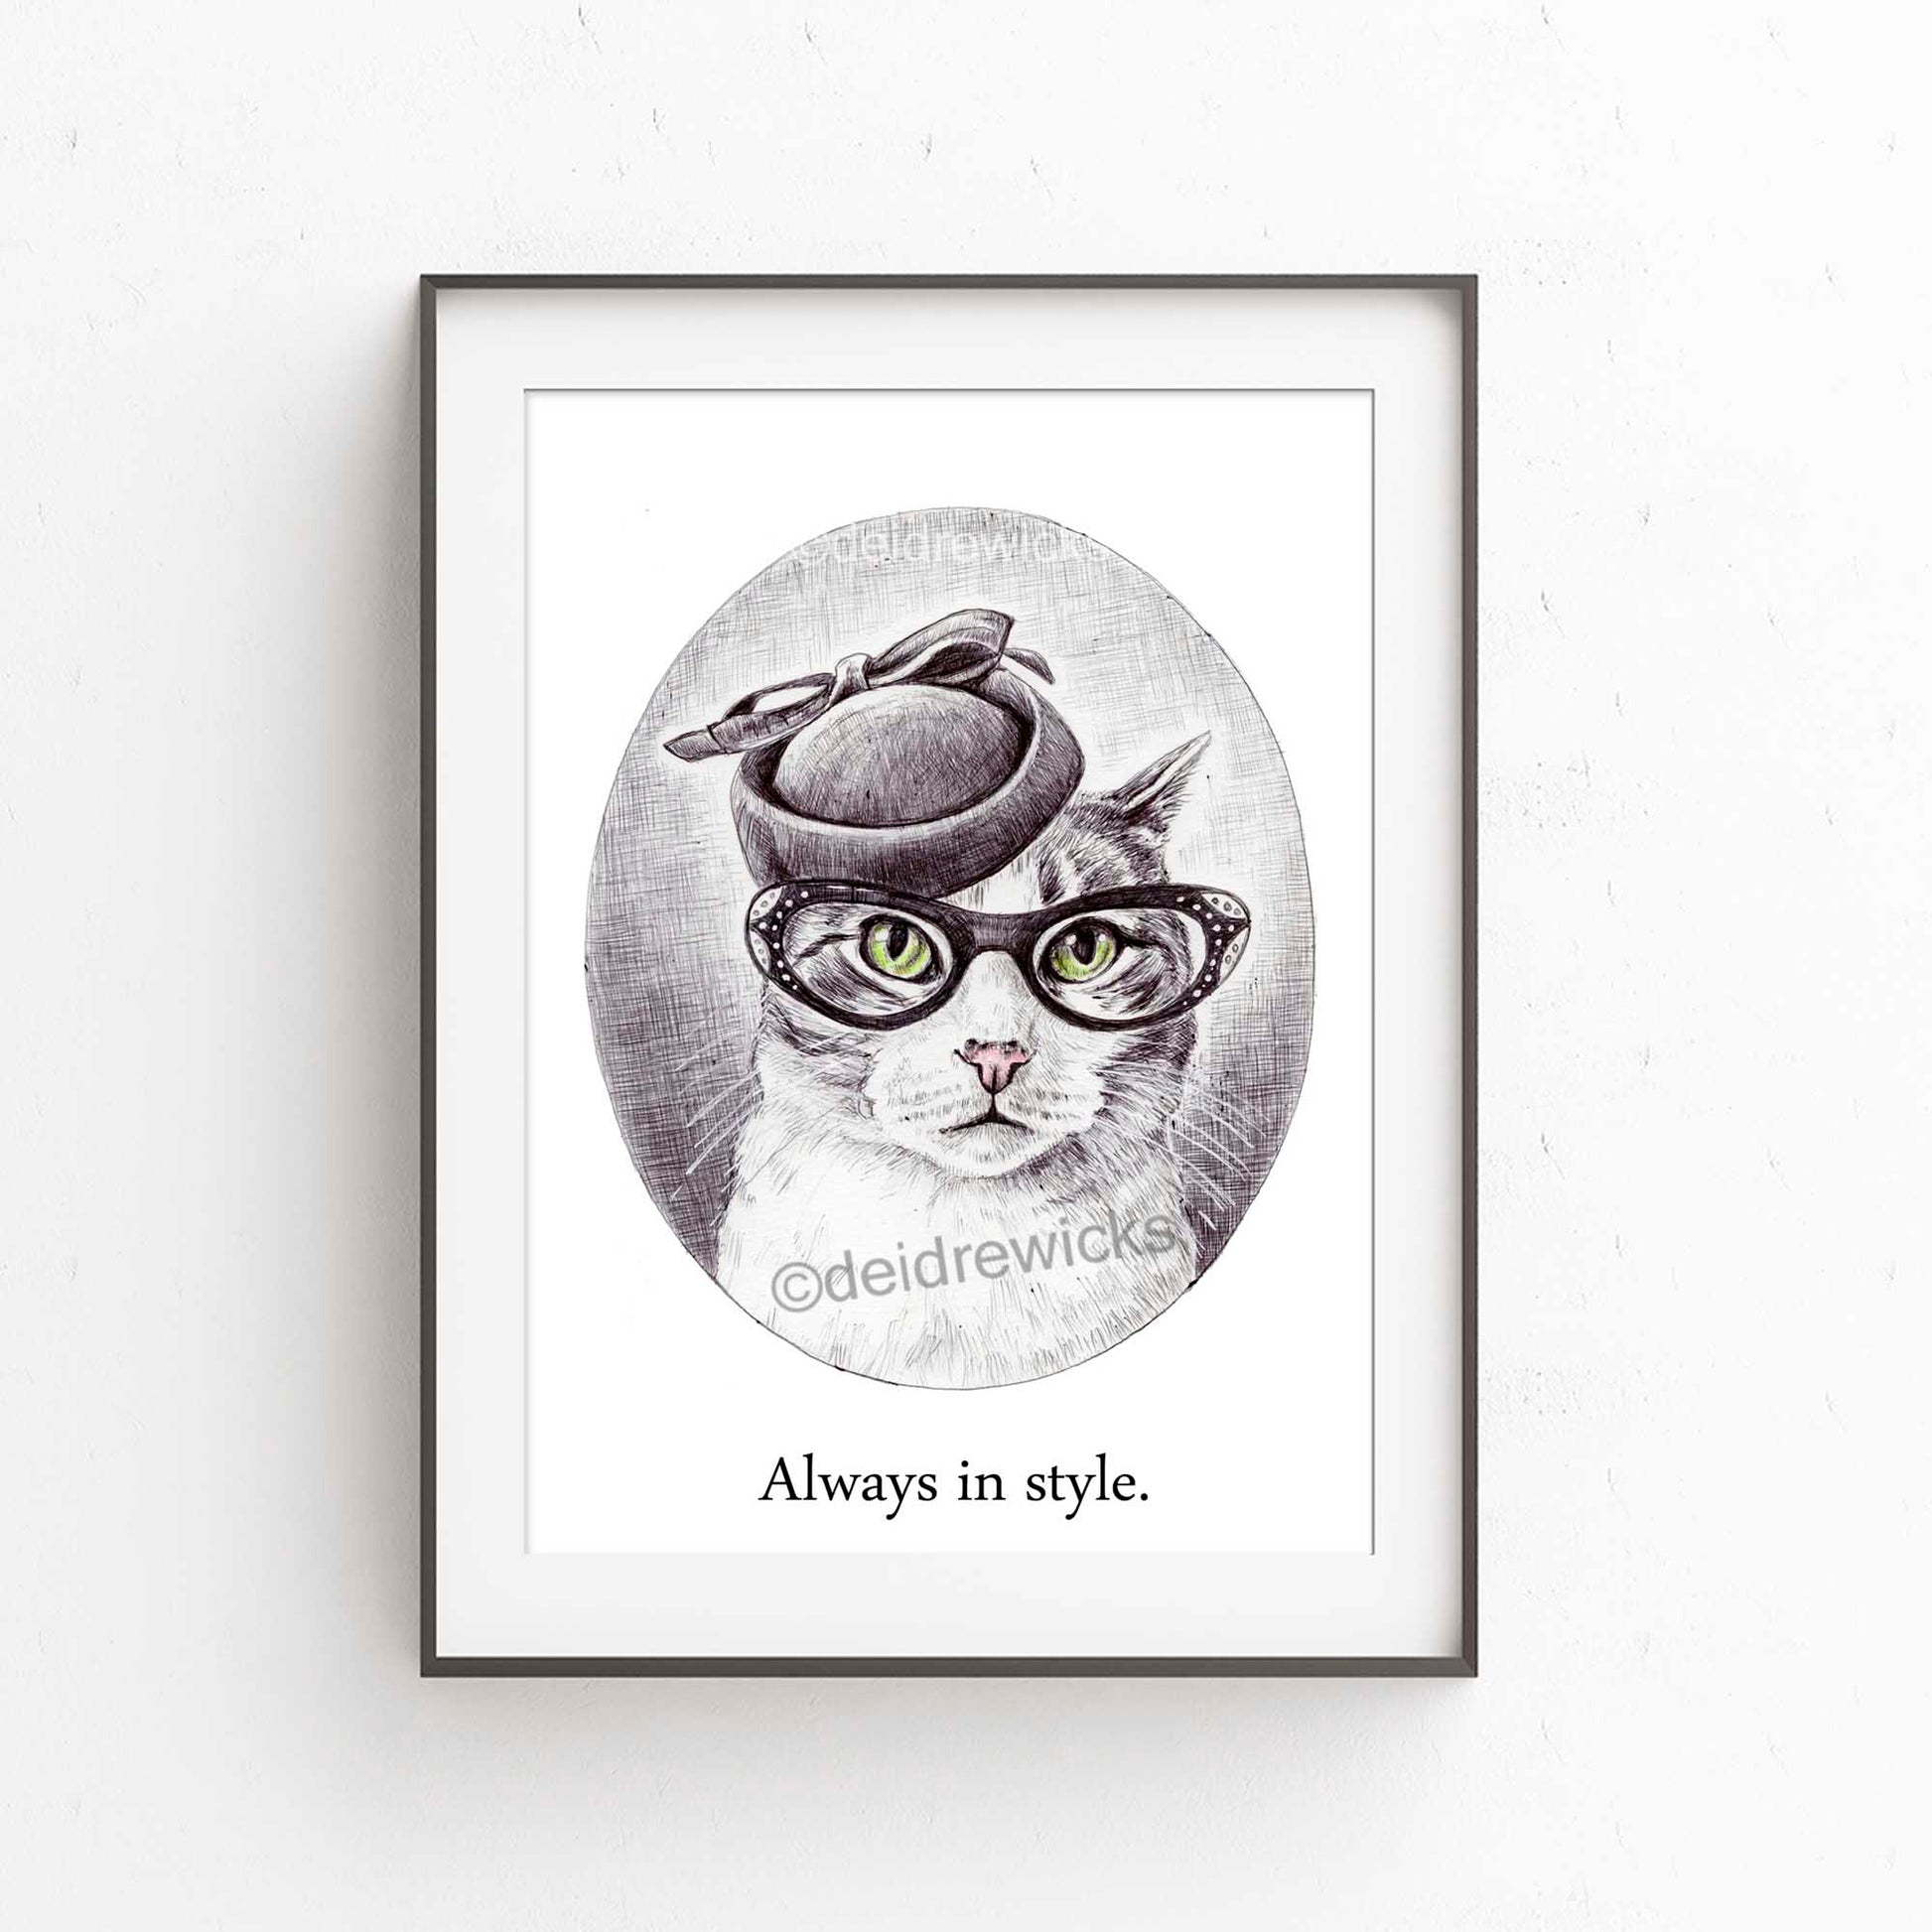 Framed example of a grey tabby cat wearing a vintage hat and glasses. Pen art by Deidre Wicks